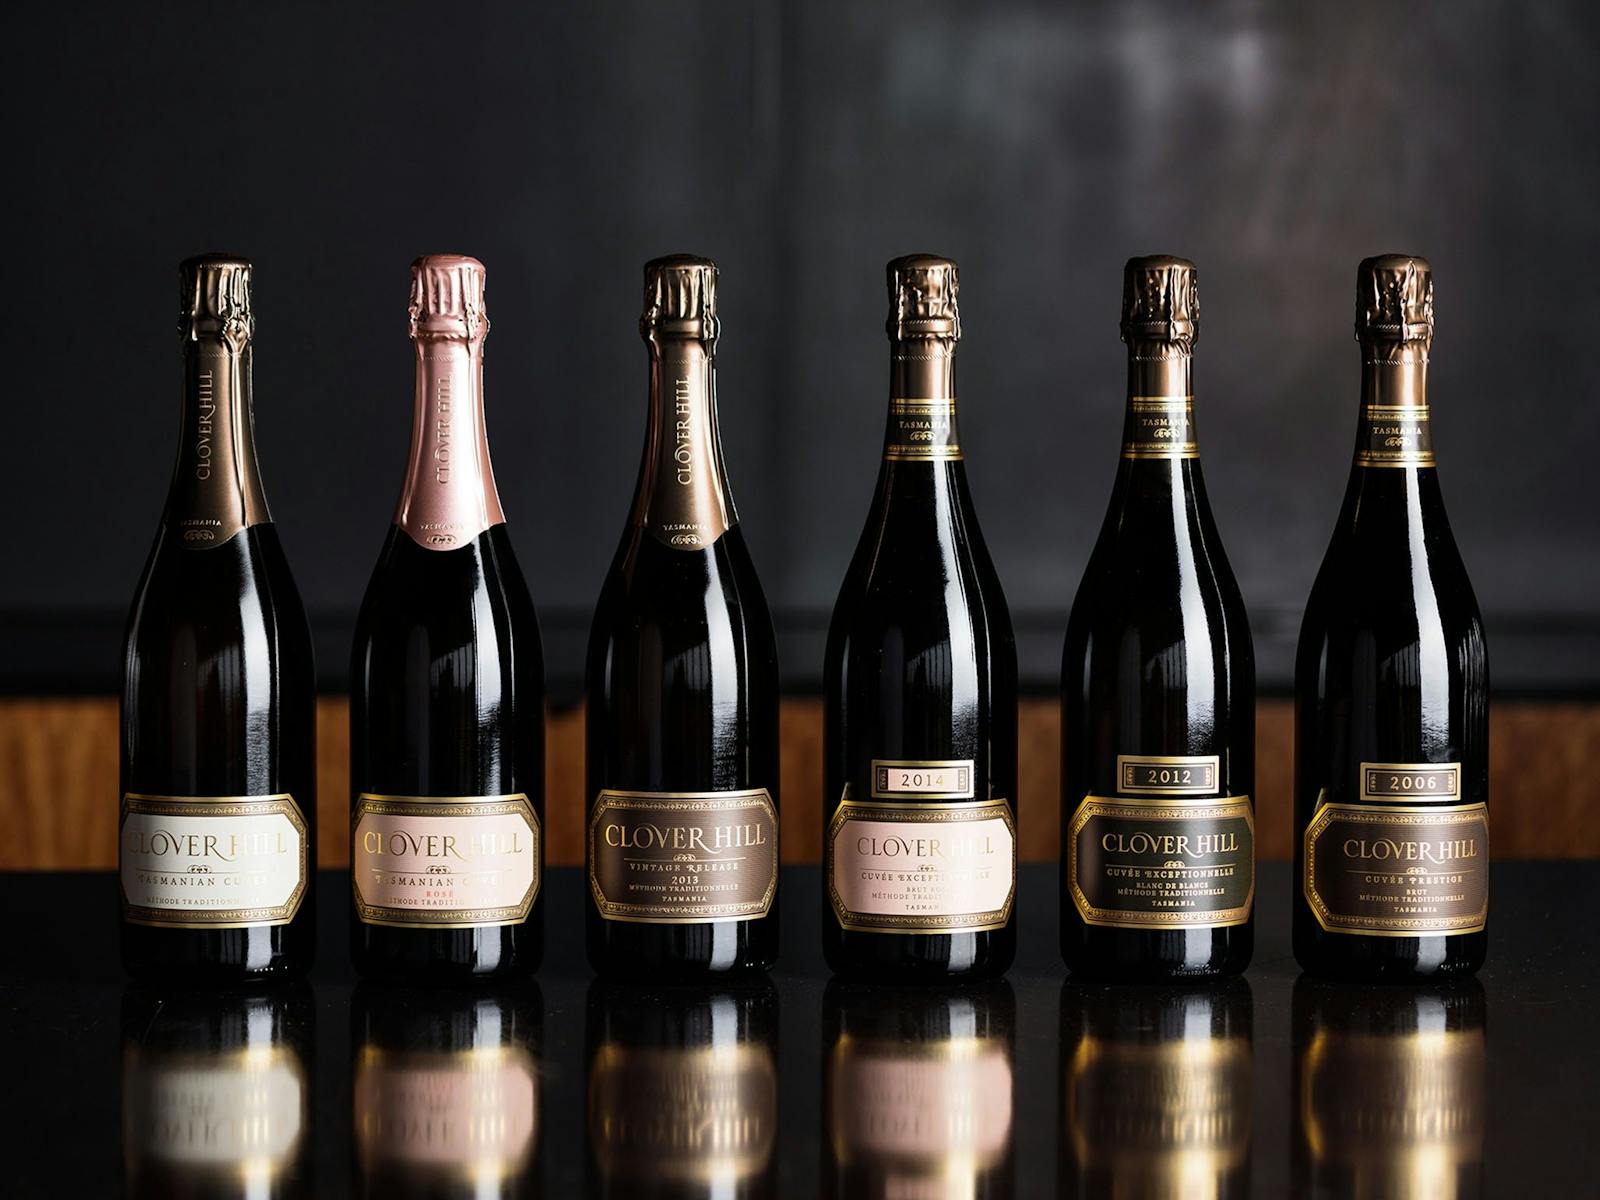 Clover Hill Sparkling Wines